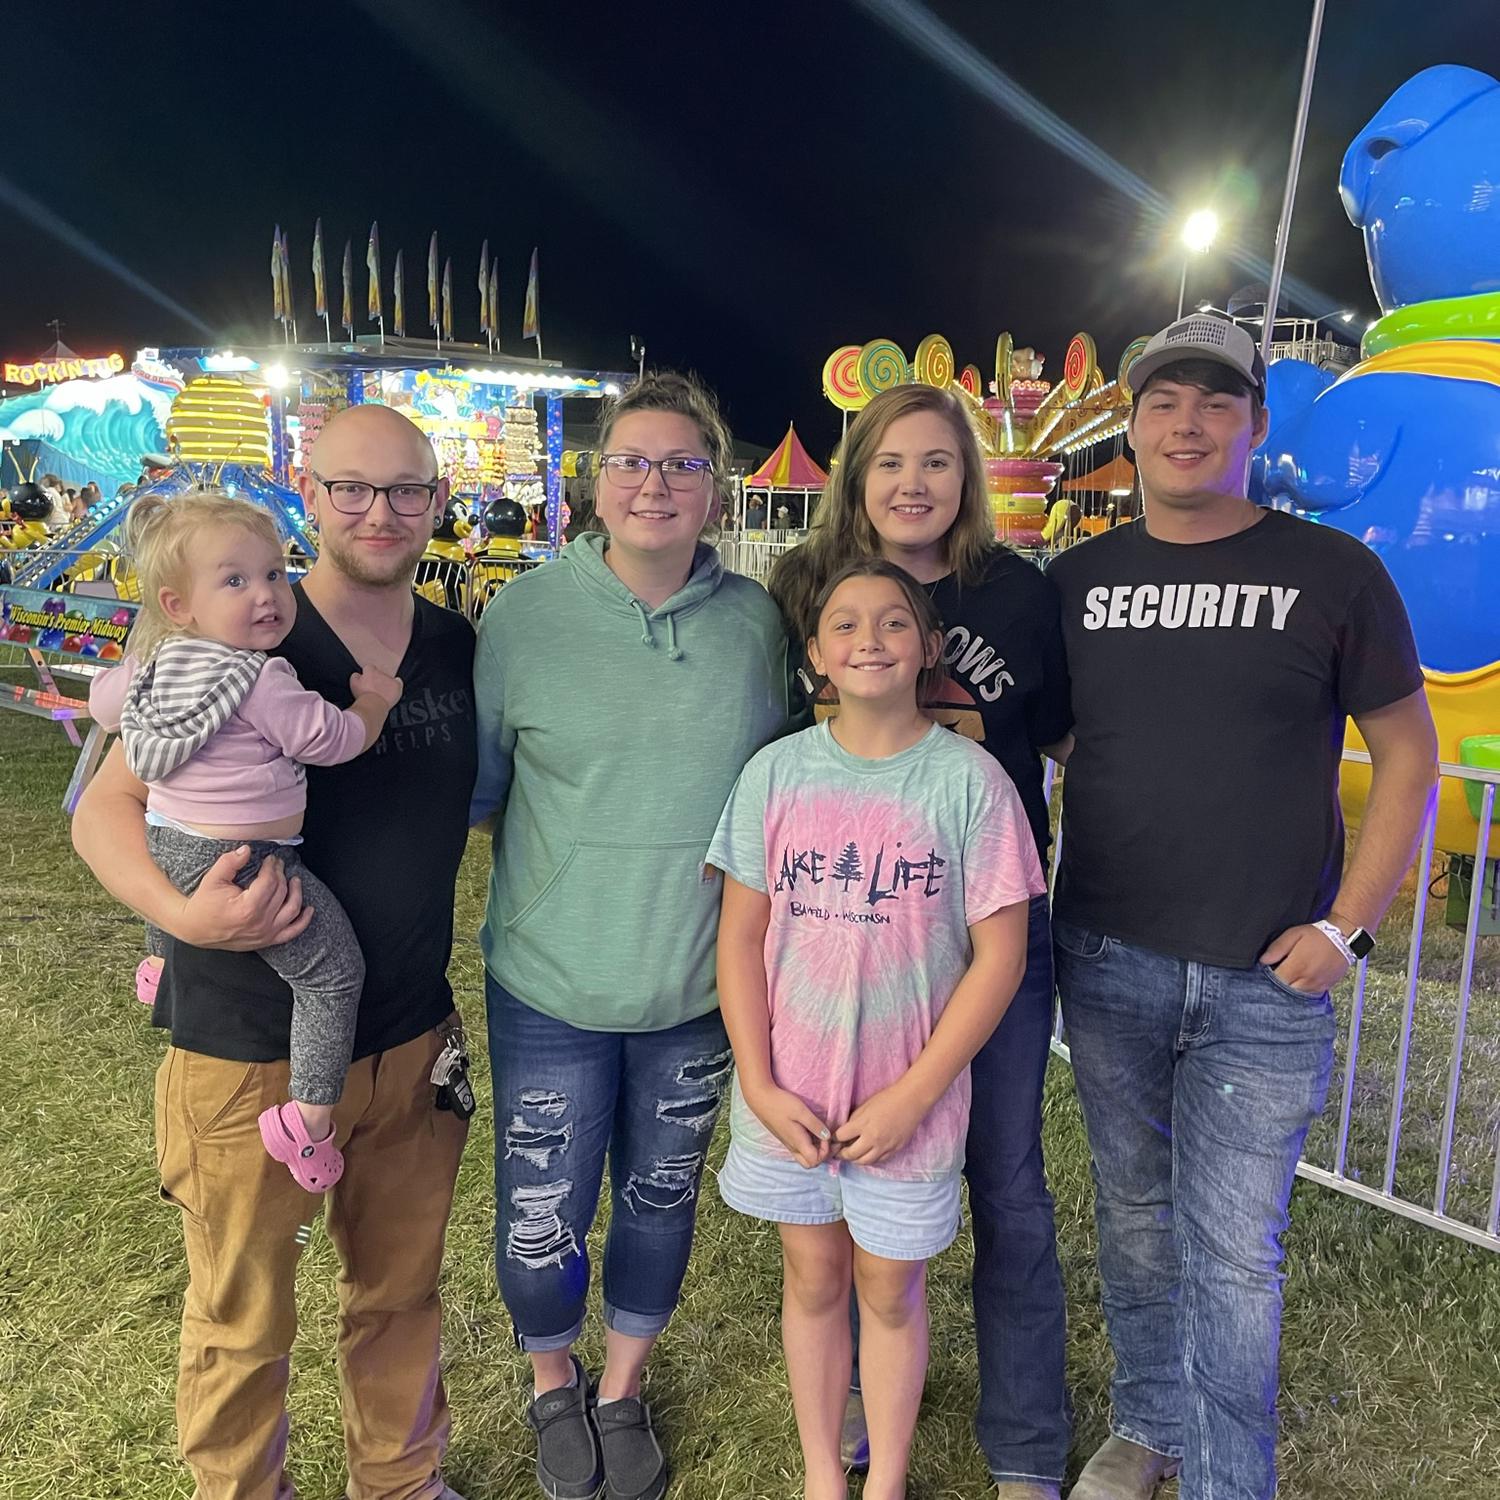 Yearly tradition of watching a concert at the Washington County fair!